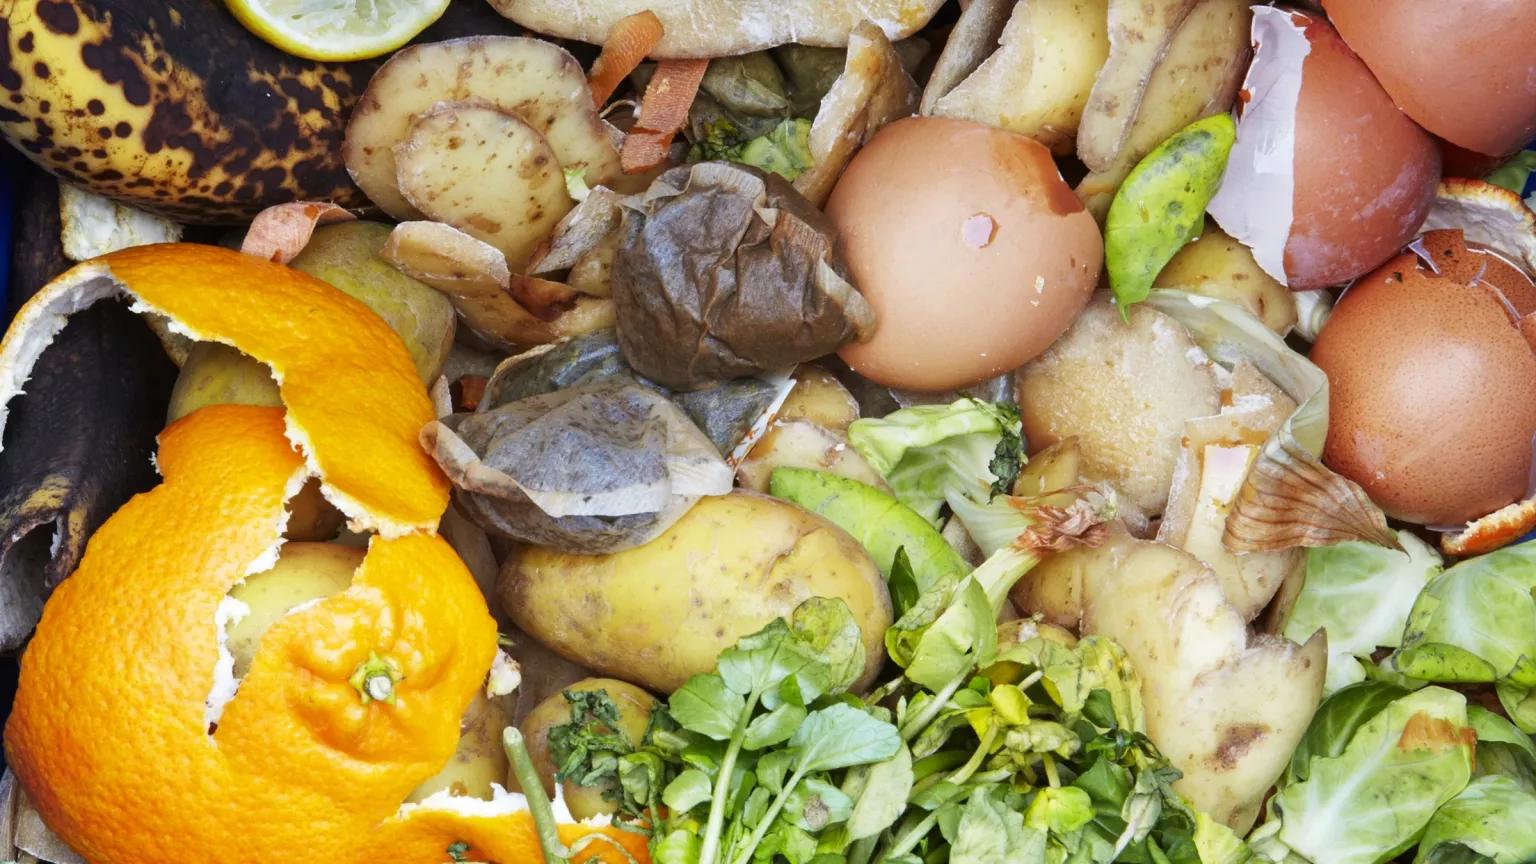 Composting helps the Earth and your garden: What you need to know